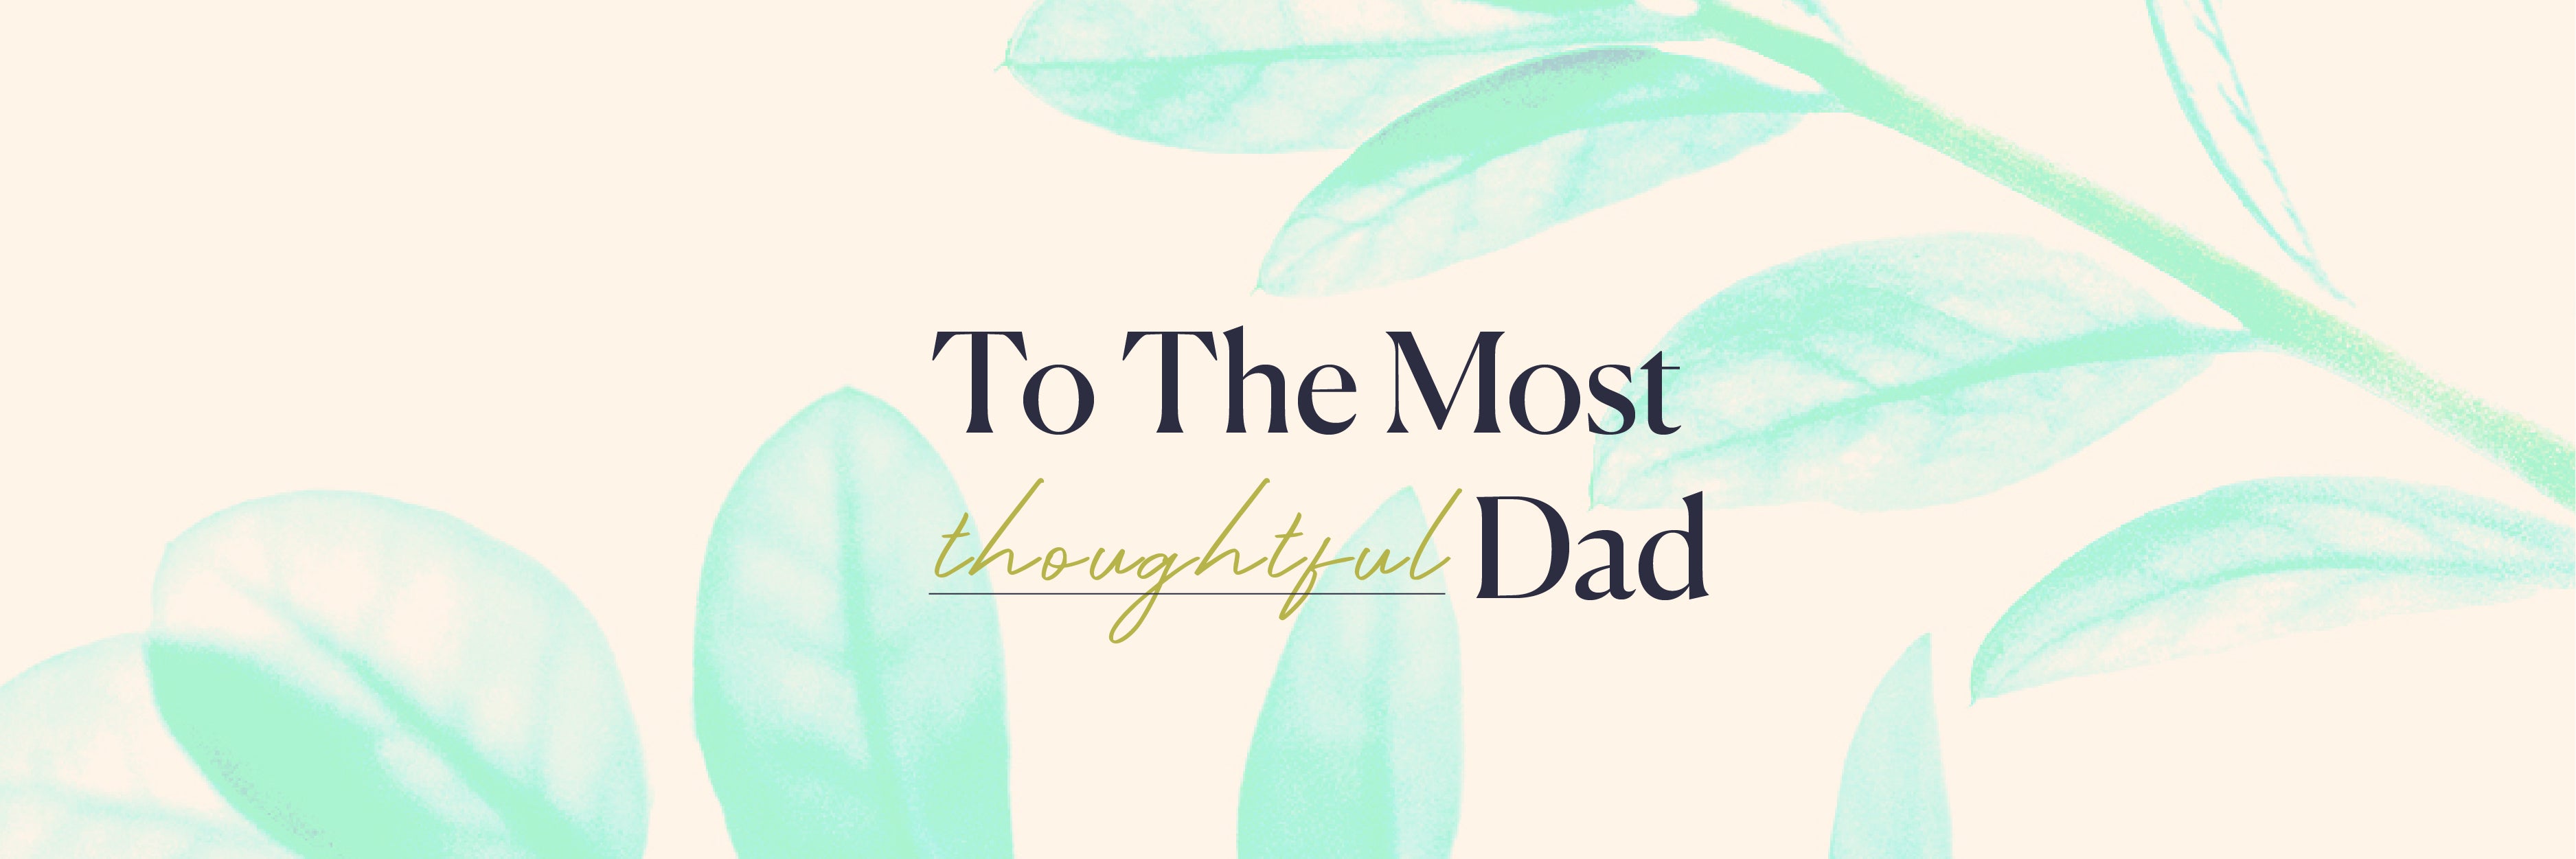 2022 FATHER'S DAY GIFT GUIDE